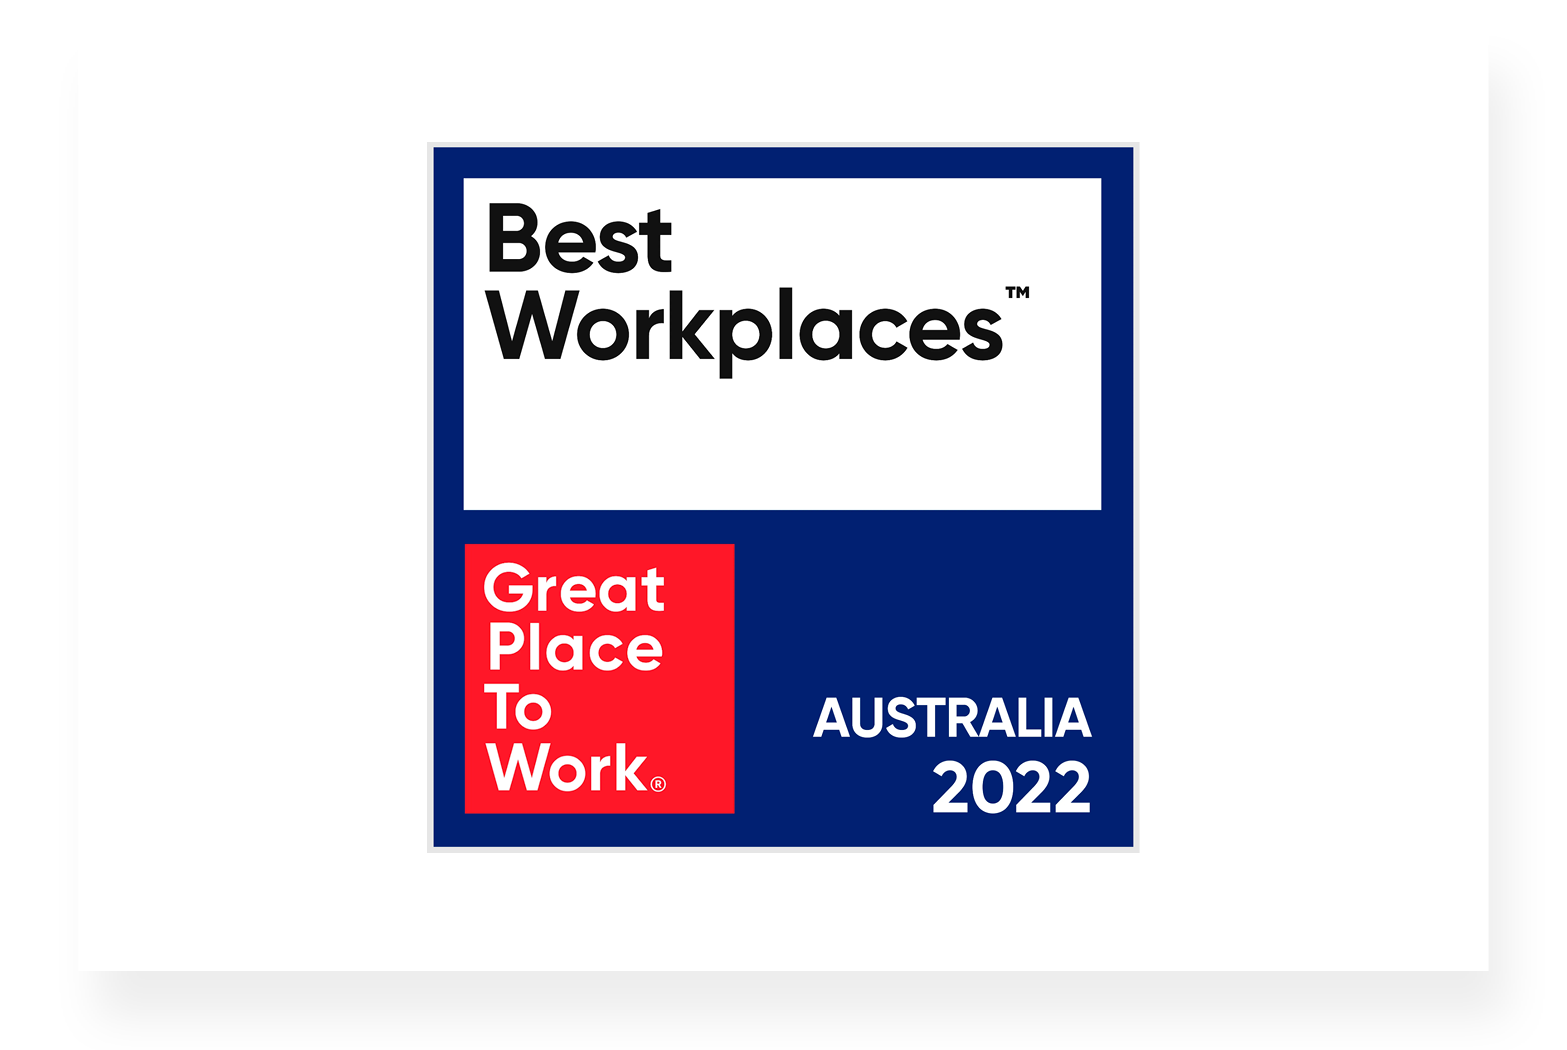 Great Place to Work Best Workplaces award for Australia 2022